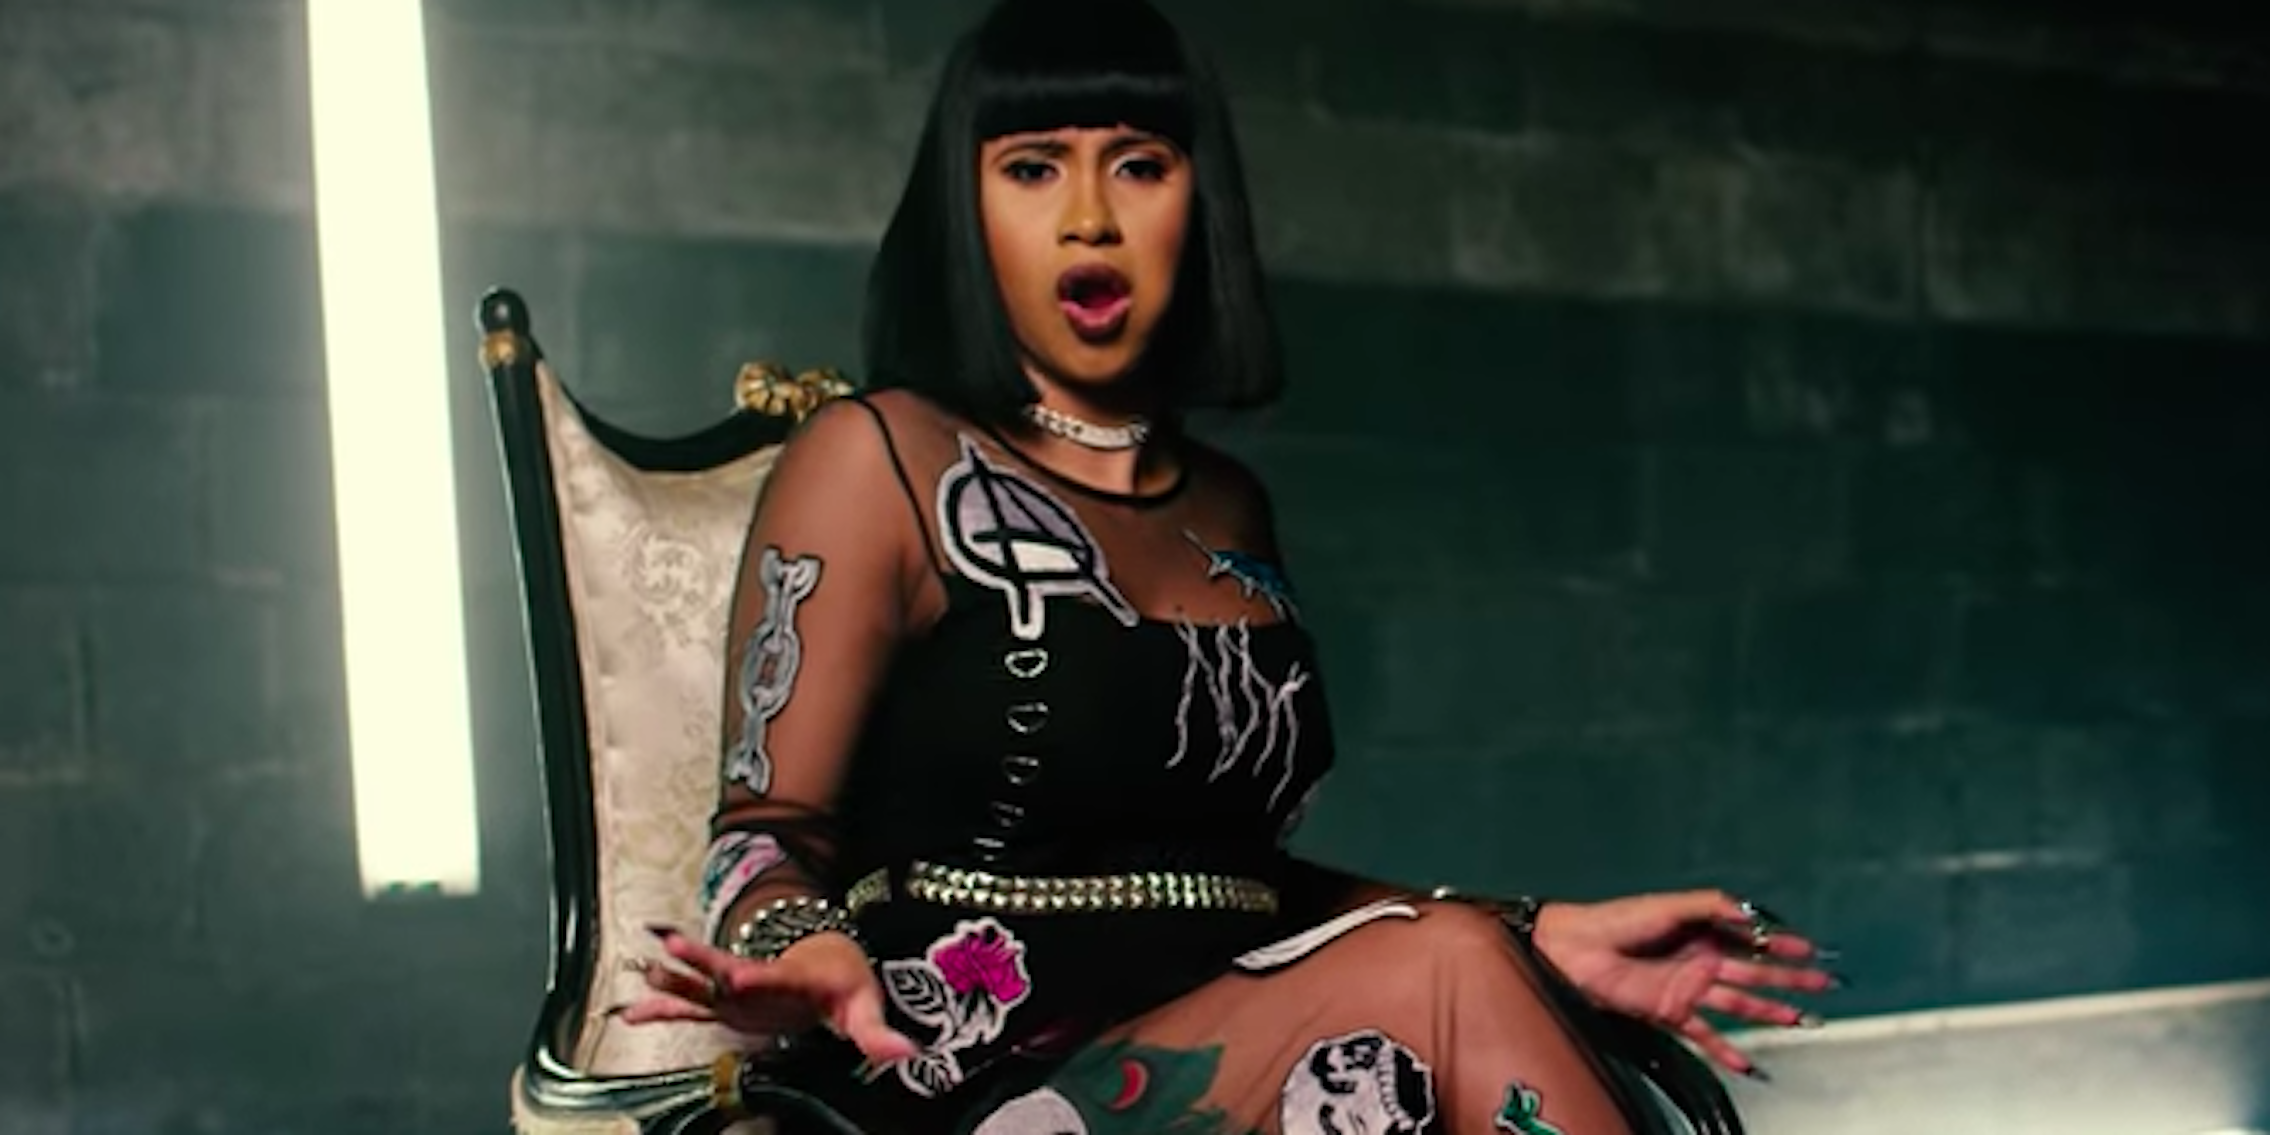 Cardi B's New Tattoo Is All About Offset & It's In the Strangest